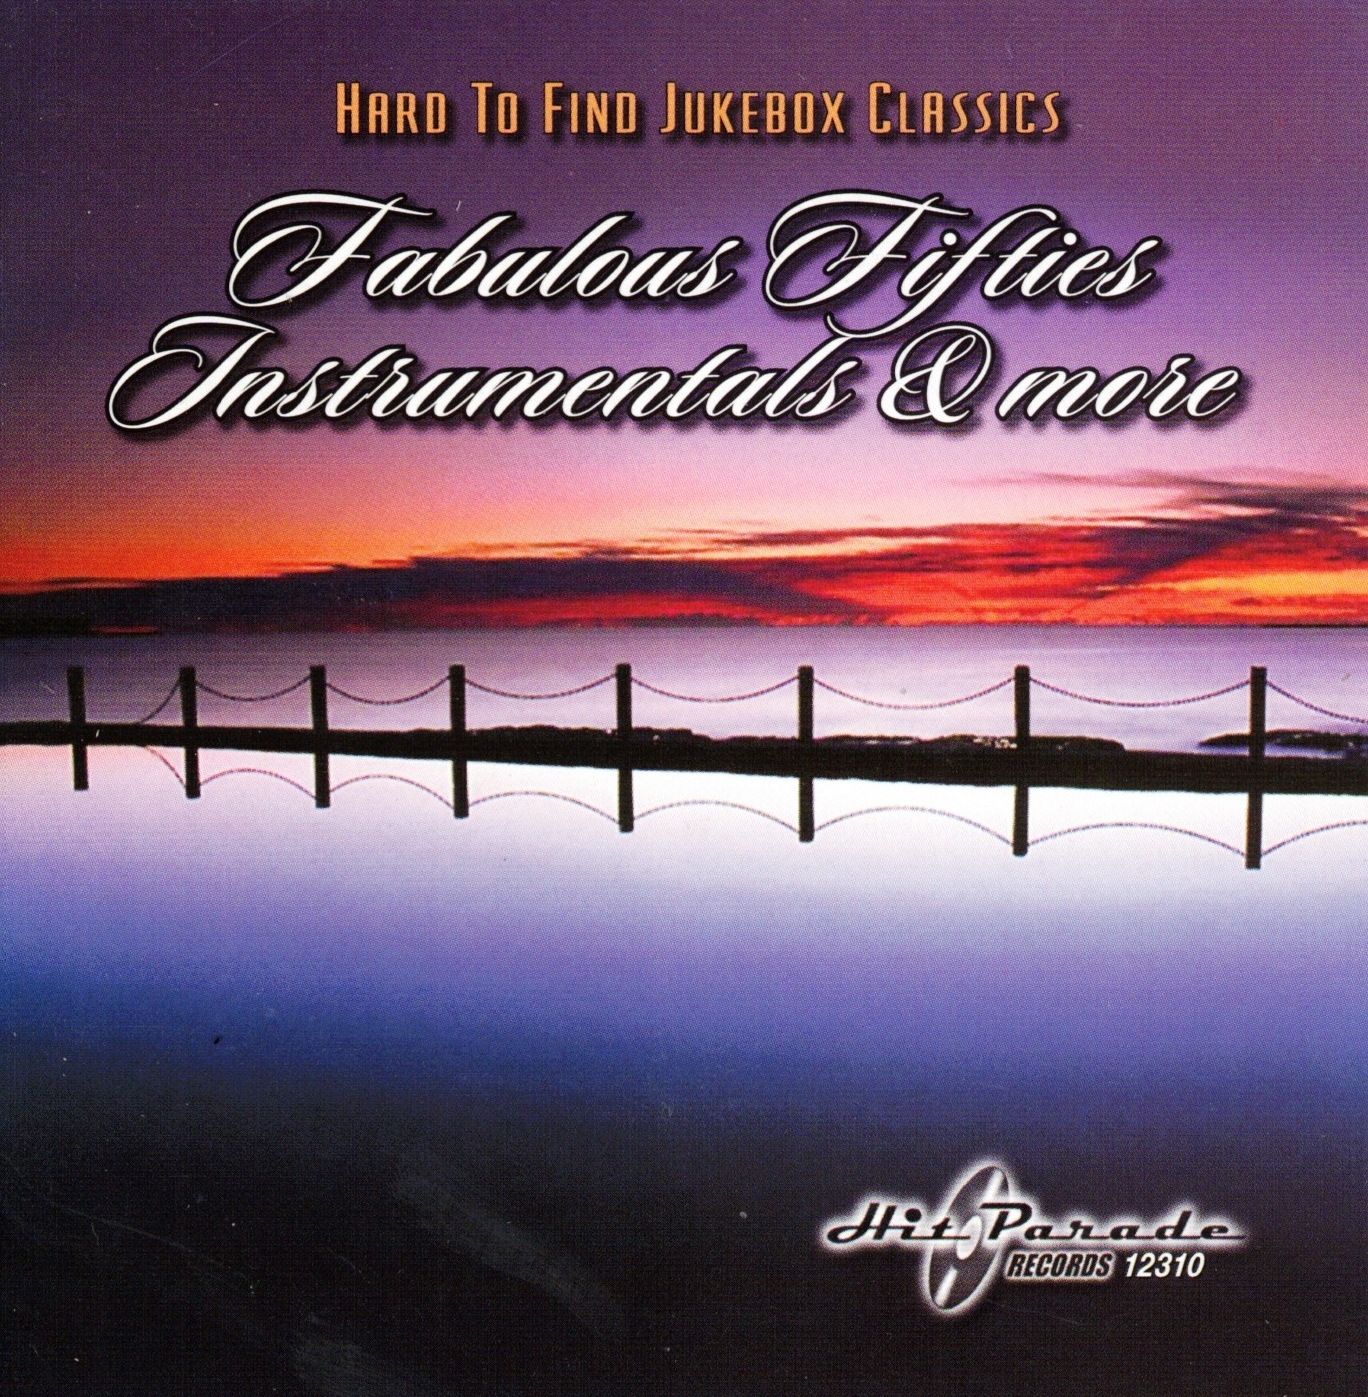 Hard To Find Jukebox Classics Fabulous Fifties Instrumentals & More